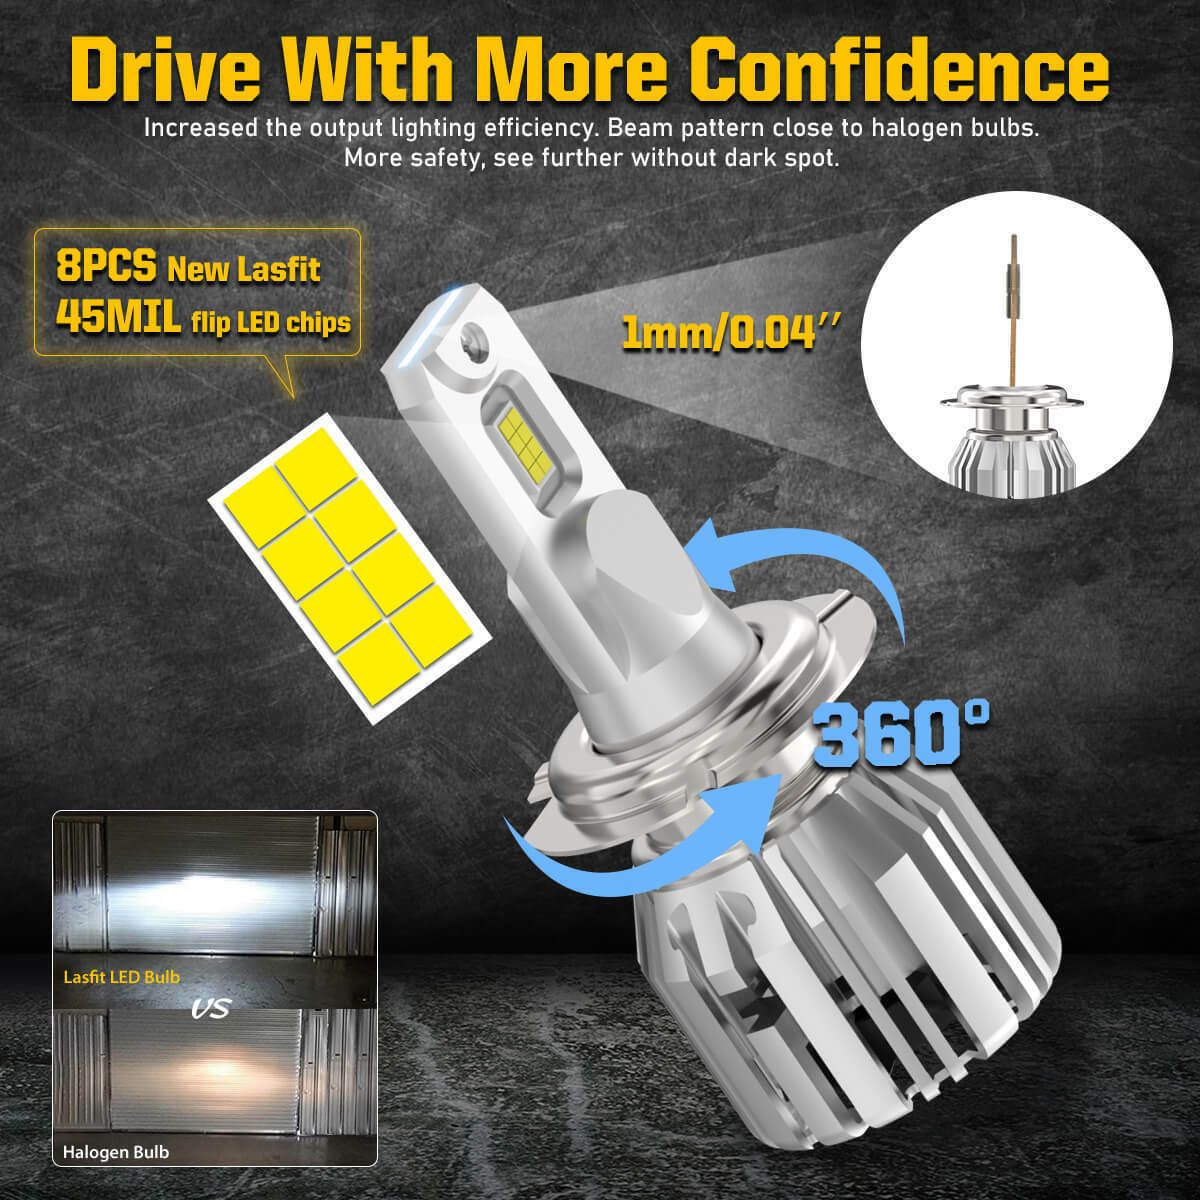 C6-H7 LED Headlight 6000K All In One Compact Design